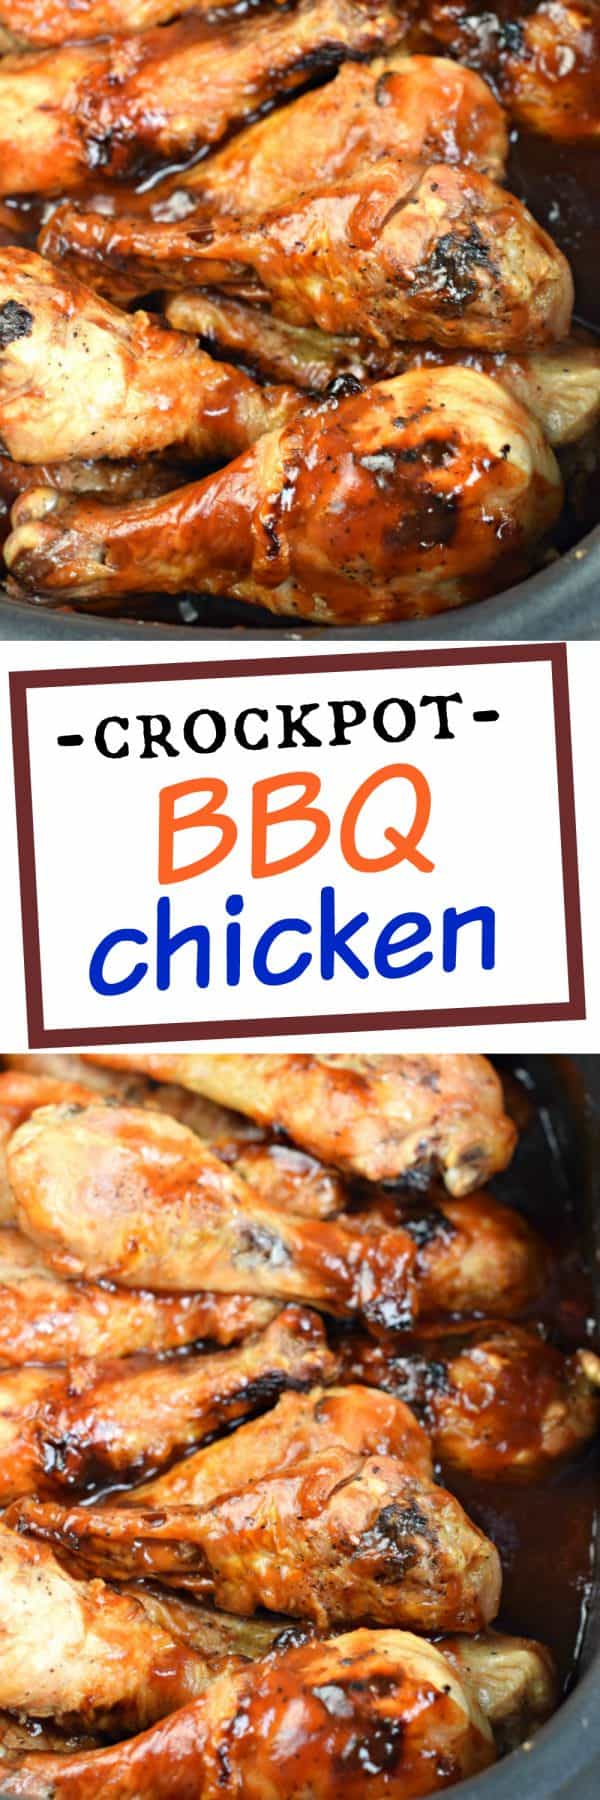 Make juicy, sweet and tangy chicken in your crockpot with this easy Slow Cooker BBQ Chicken recipe!